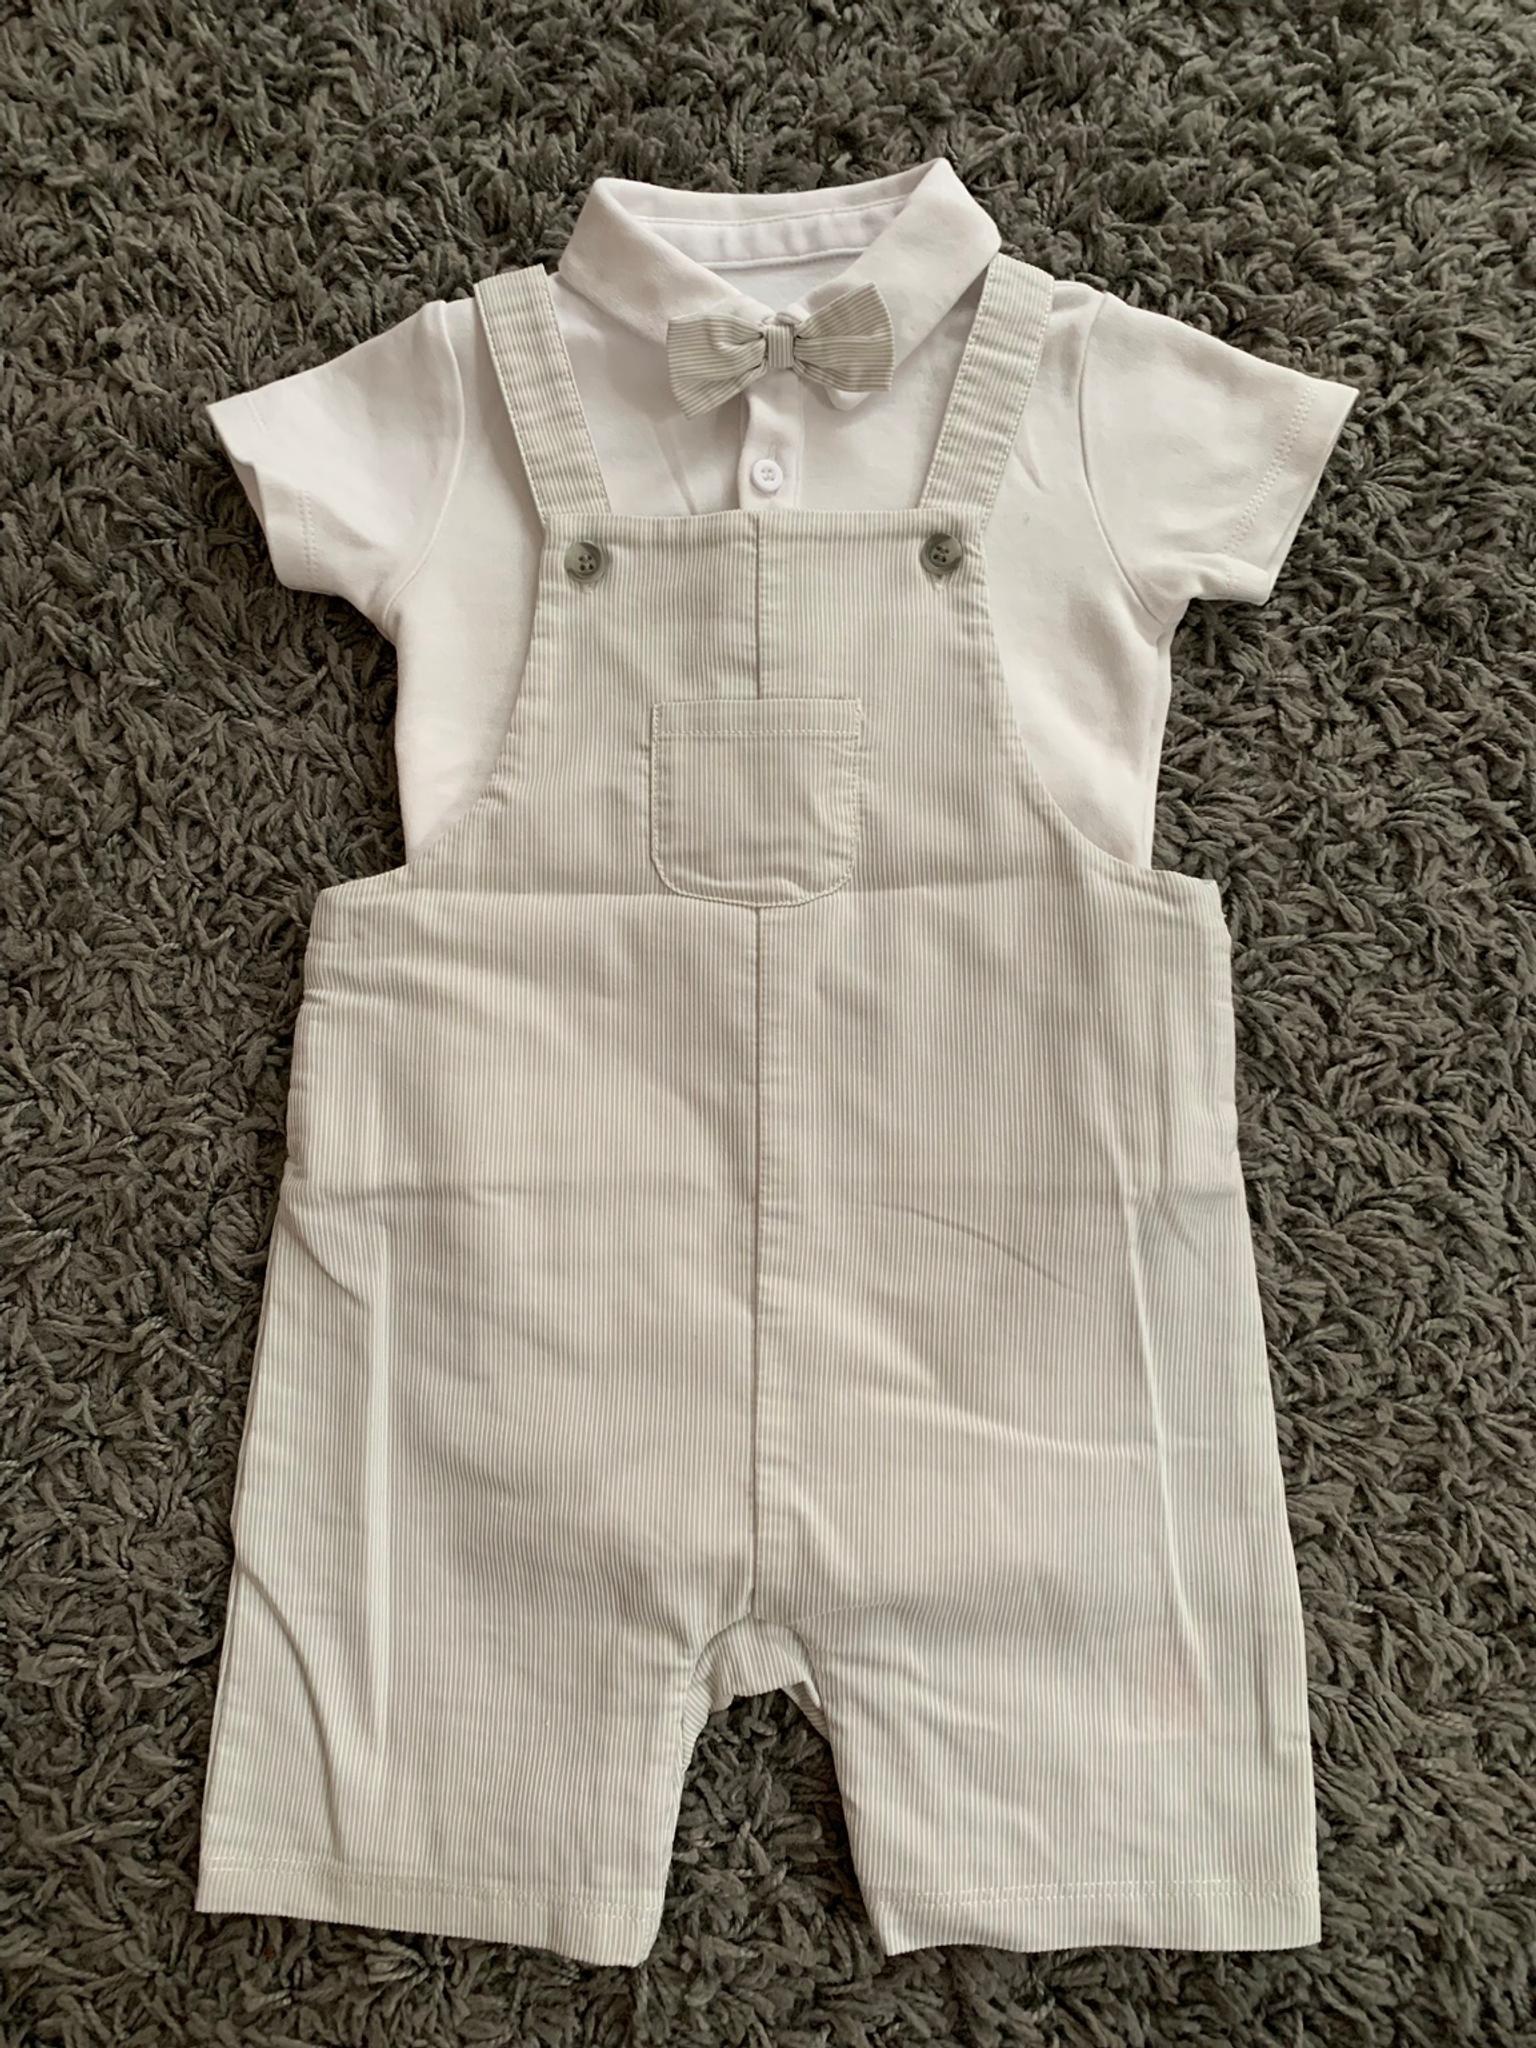 boy christening outfit mothercare